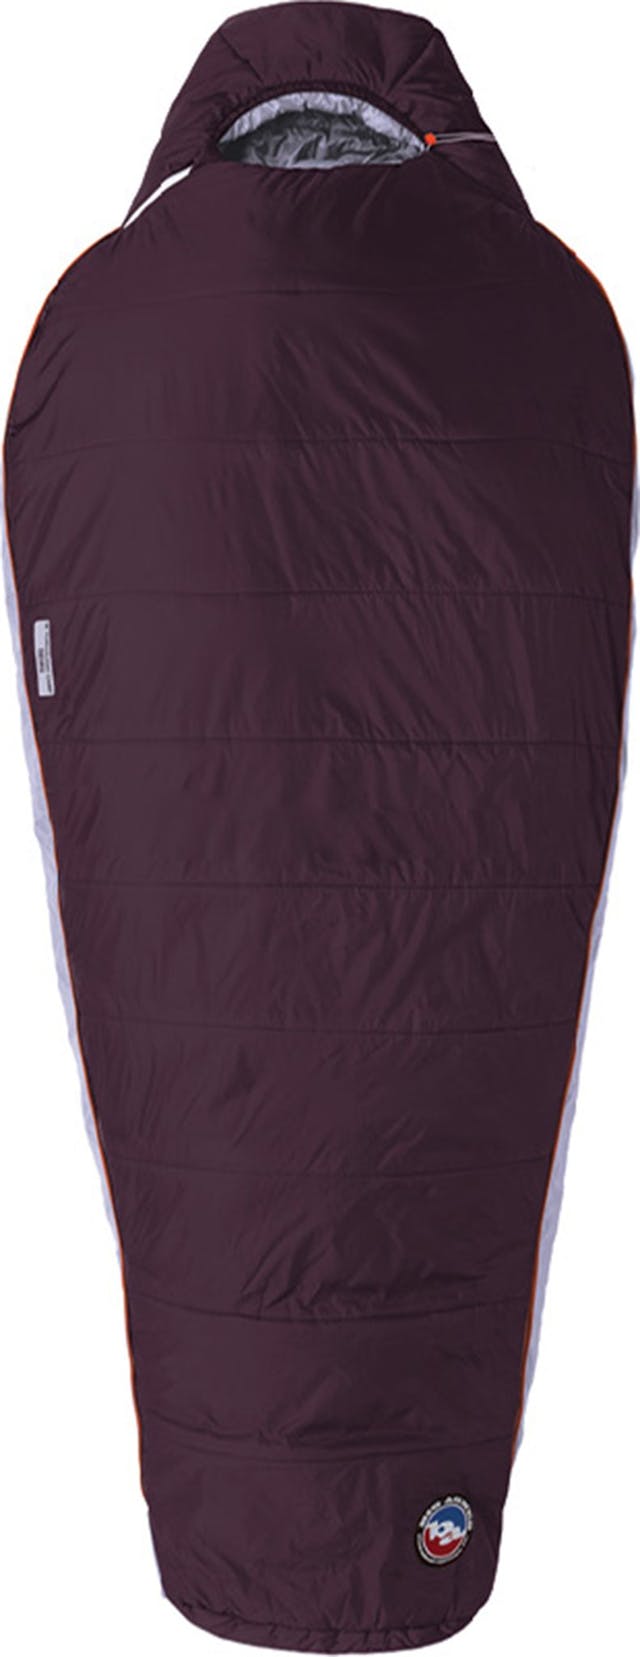 Product image for Torchlight Camp 20 Sleeping Bag - Women's